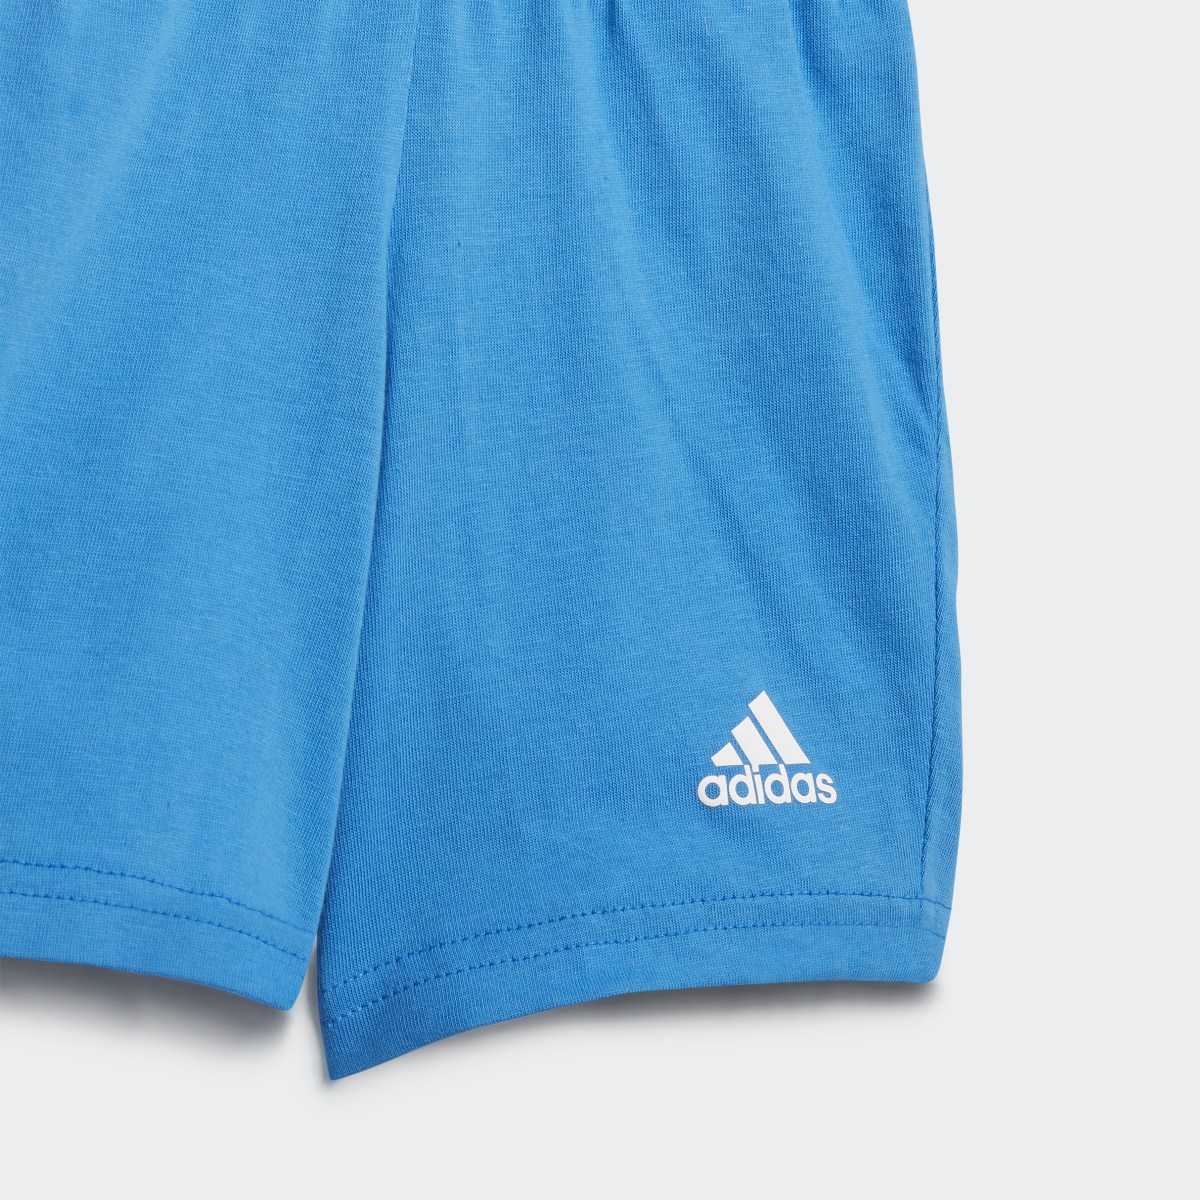 Adidas Completo Essentials Tee and Shorts. 9